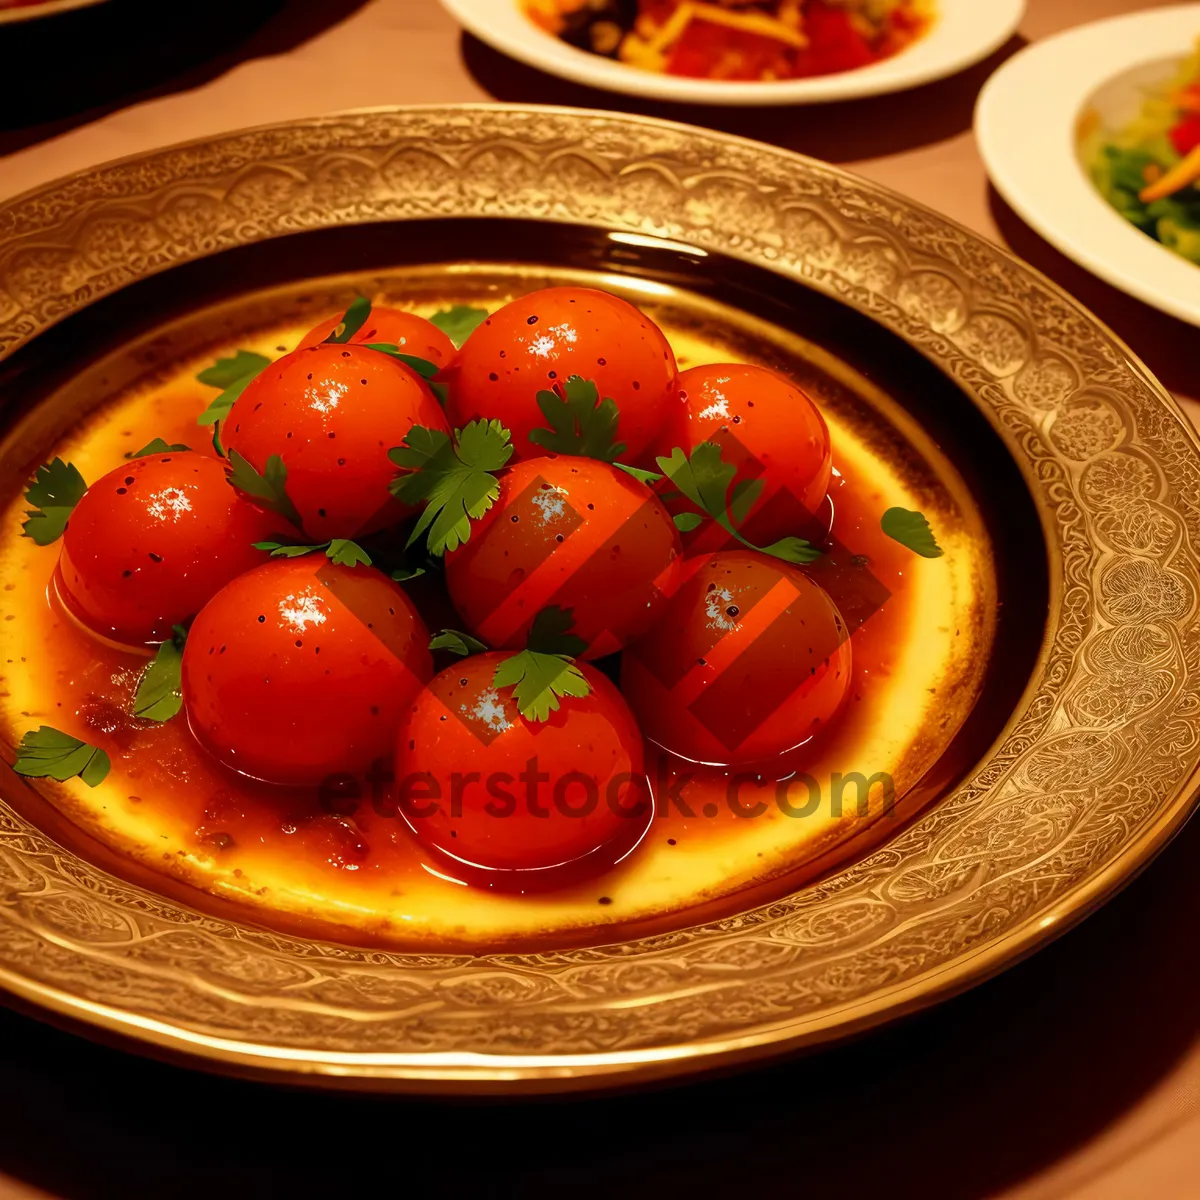 Picture of Fresh Gourmet Salad Plate with Delicious Tomato